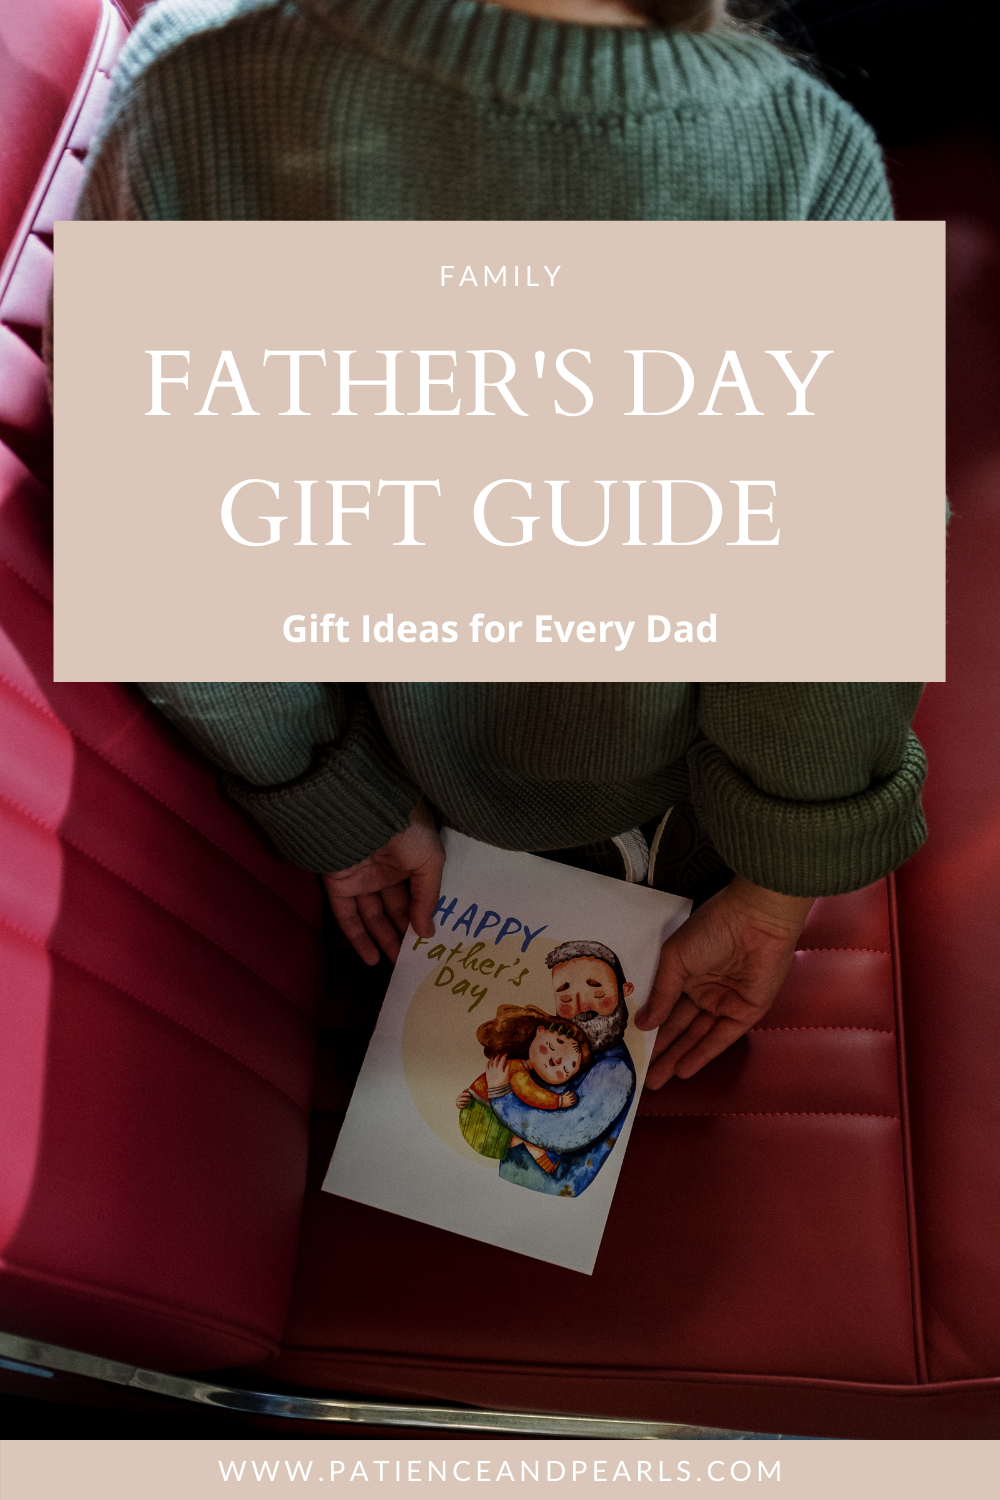 Father's Day Gift Guide - Patience & Pearls - Pinterest